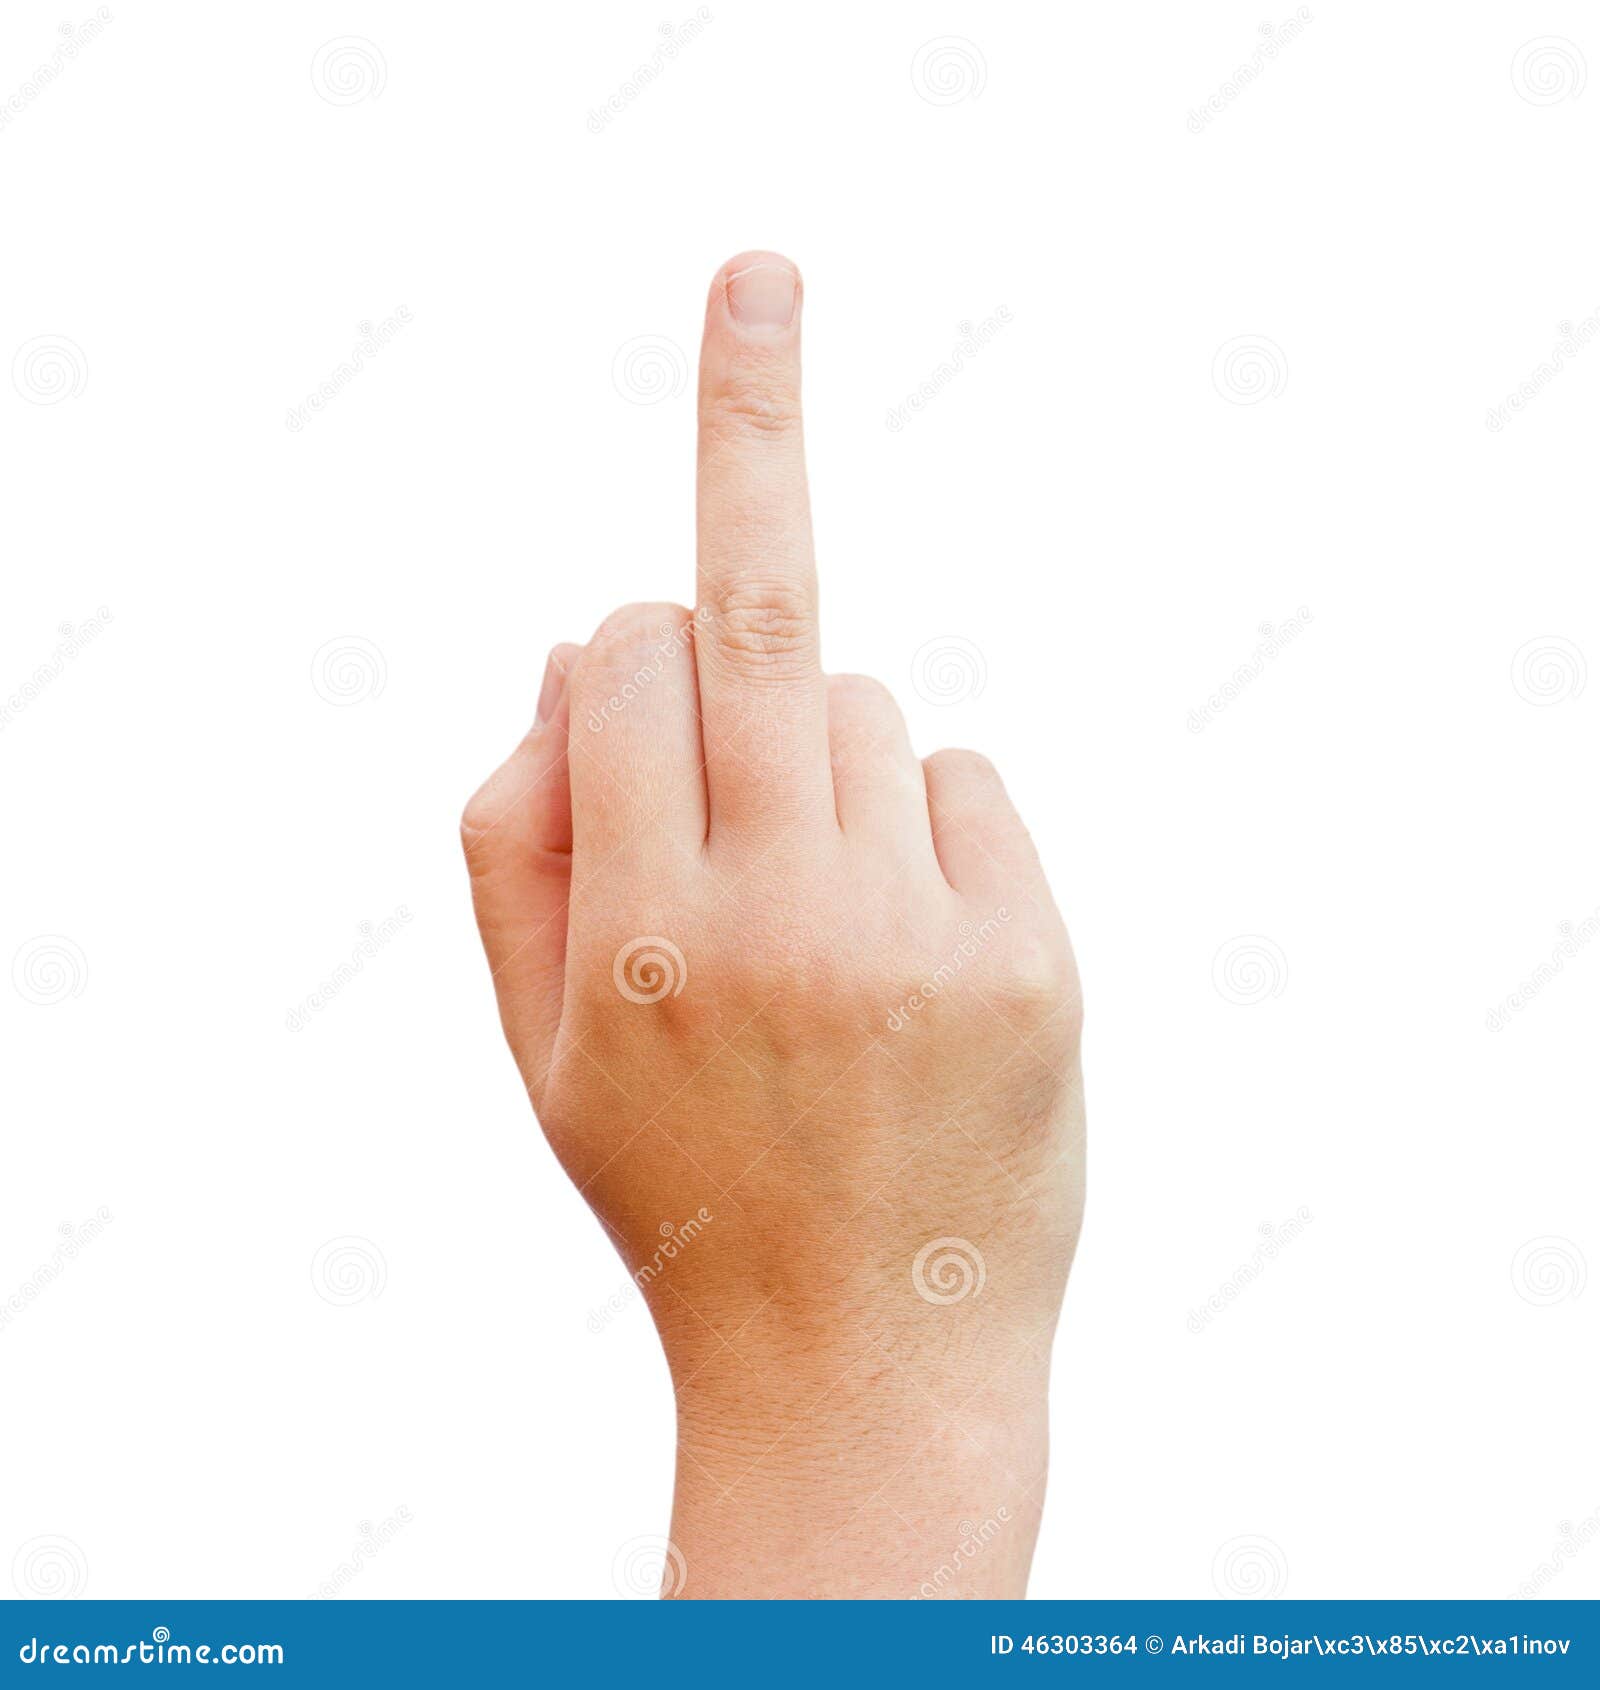 [Image: middle-finger-offensive-gesture-isolated...303364.jpg]